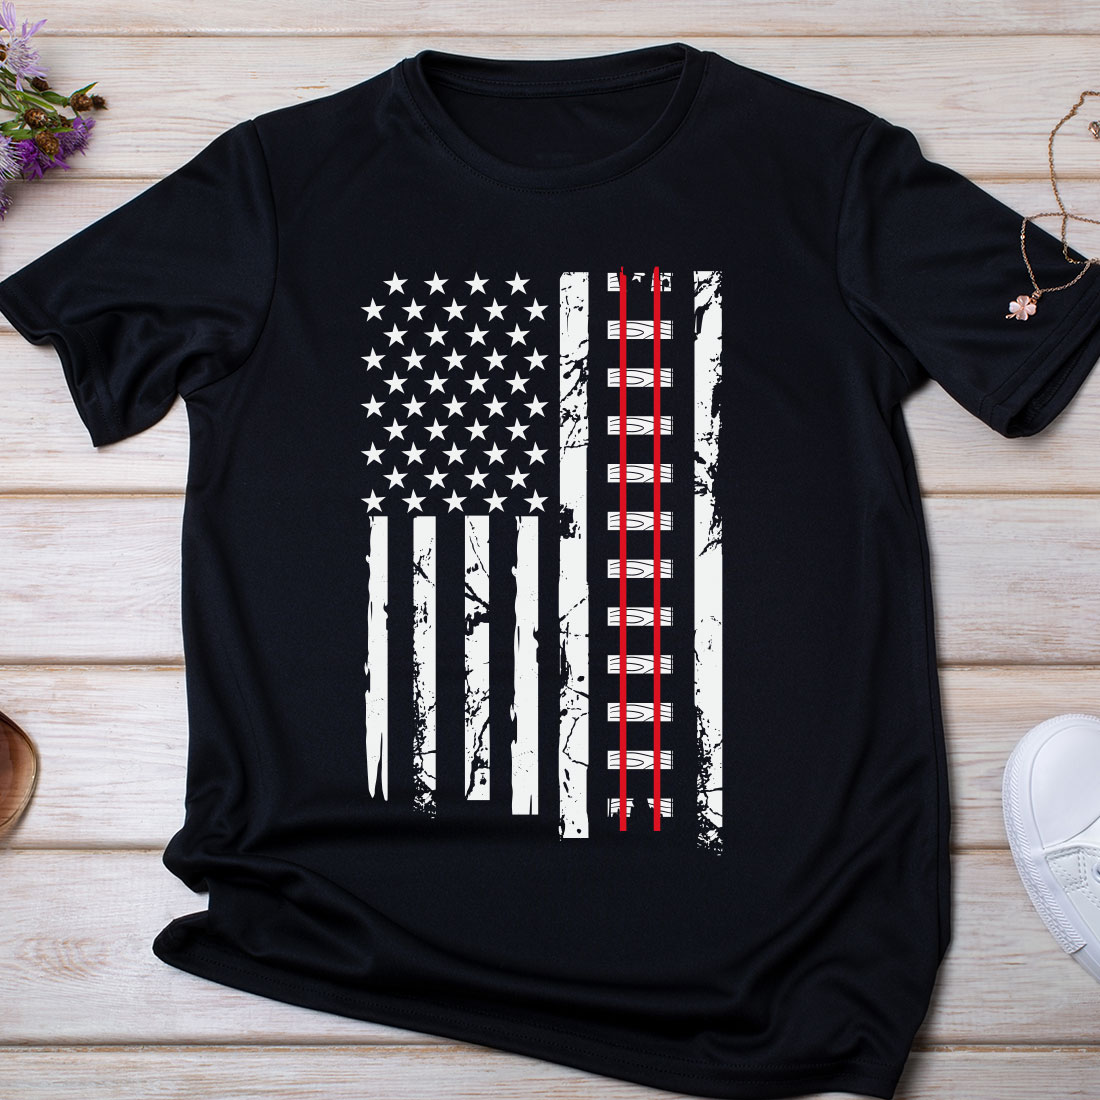 Black shirt with an american flag on it.